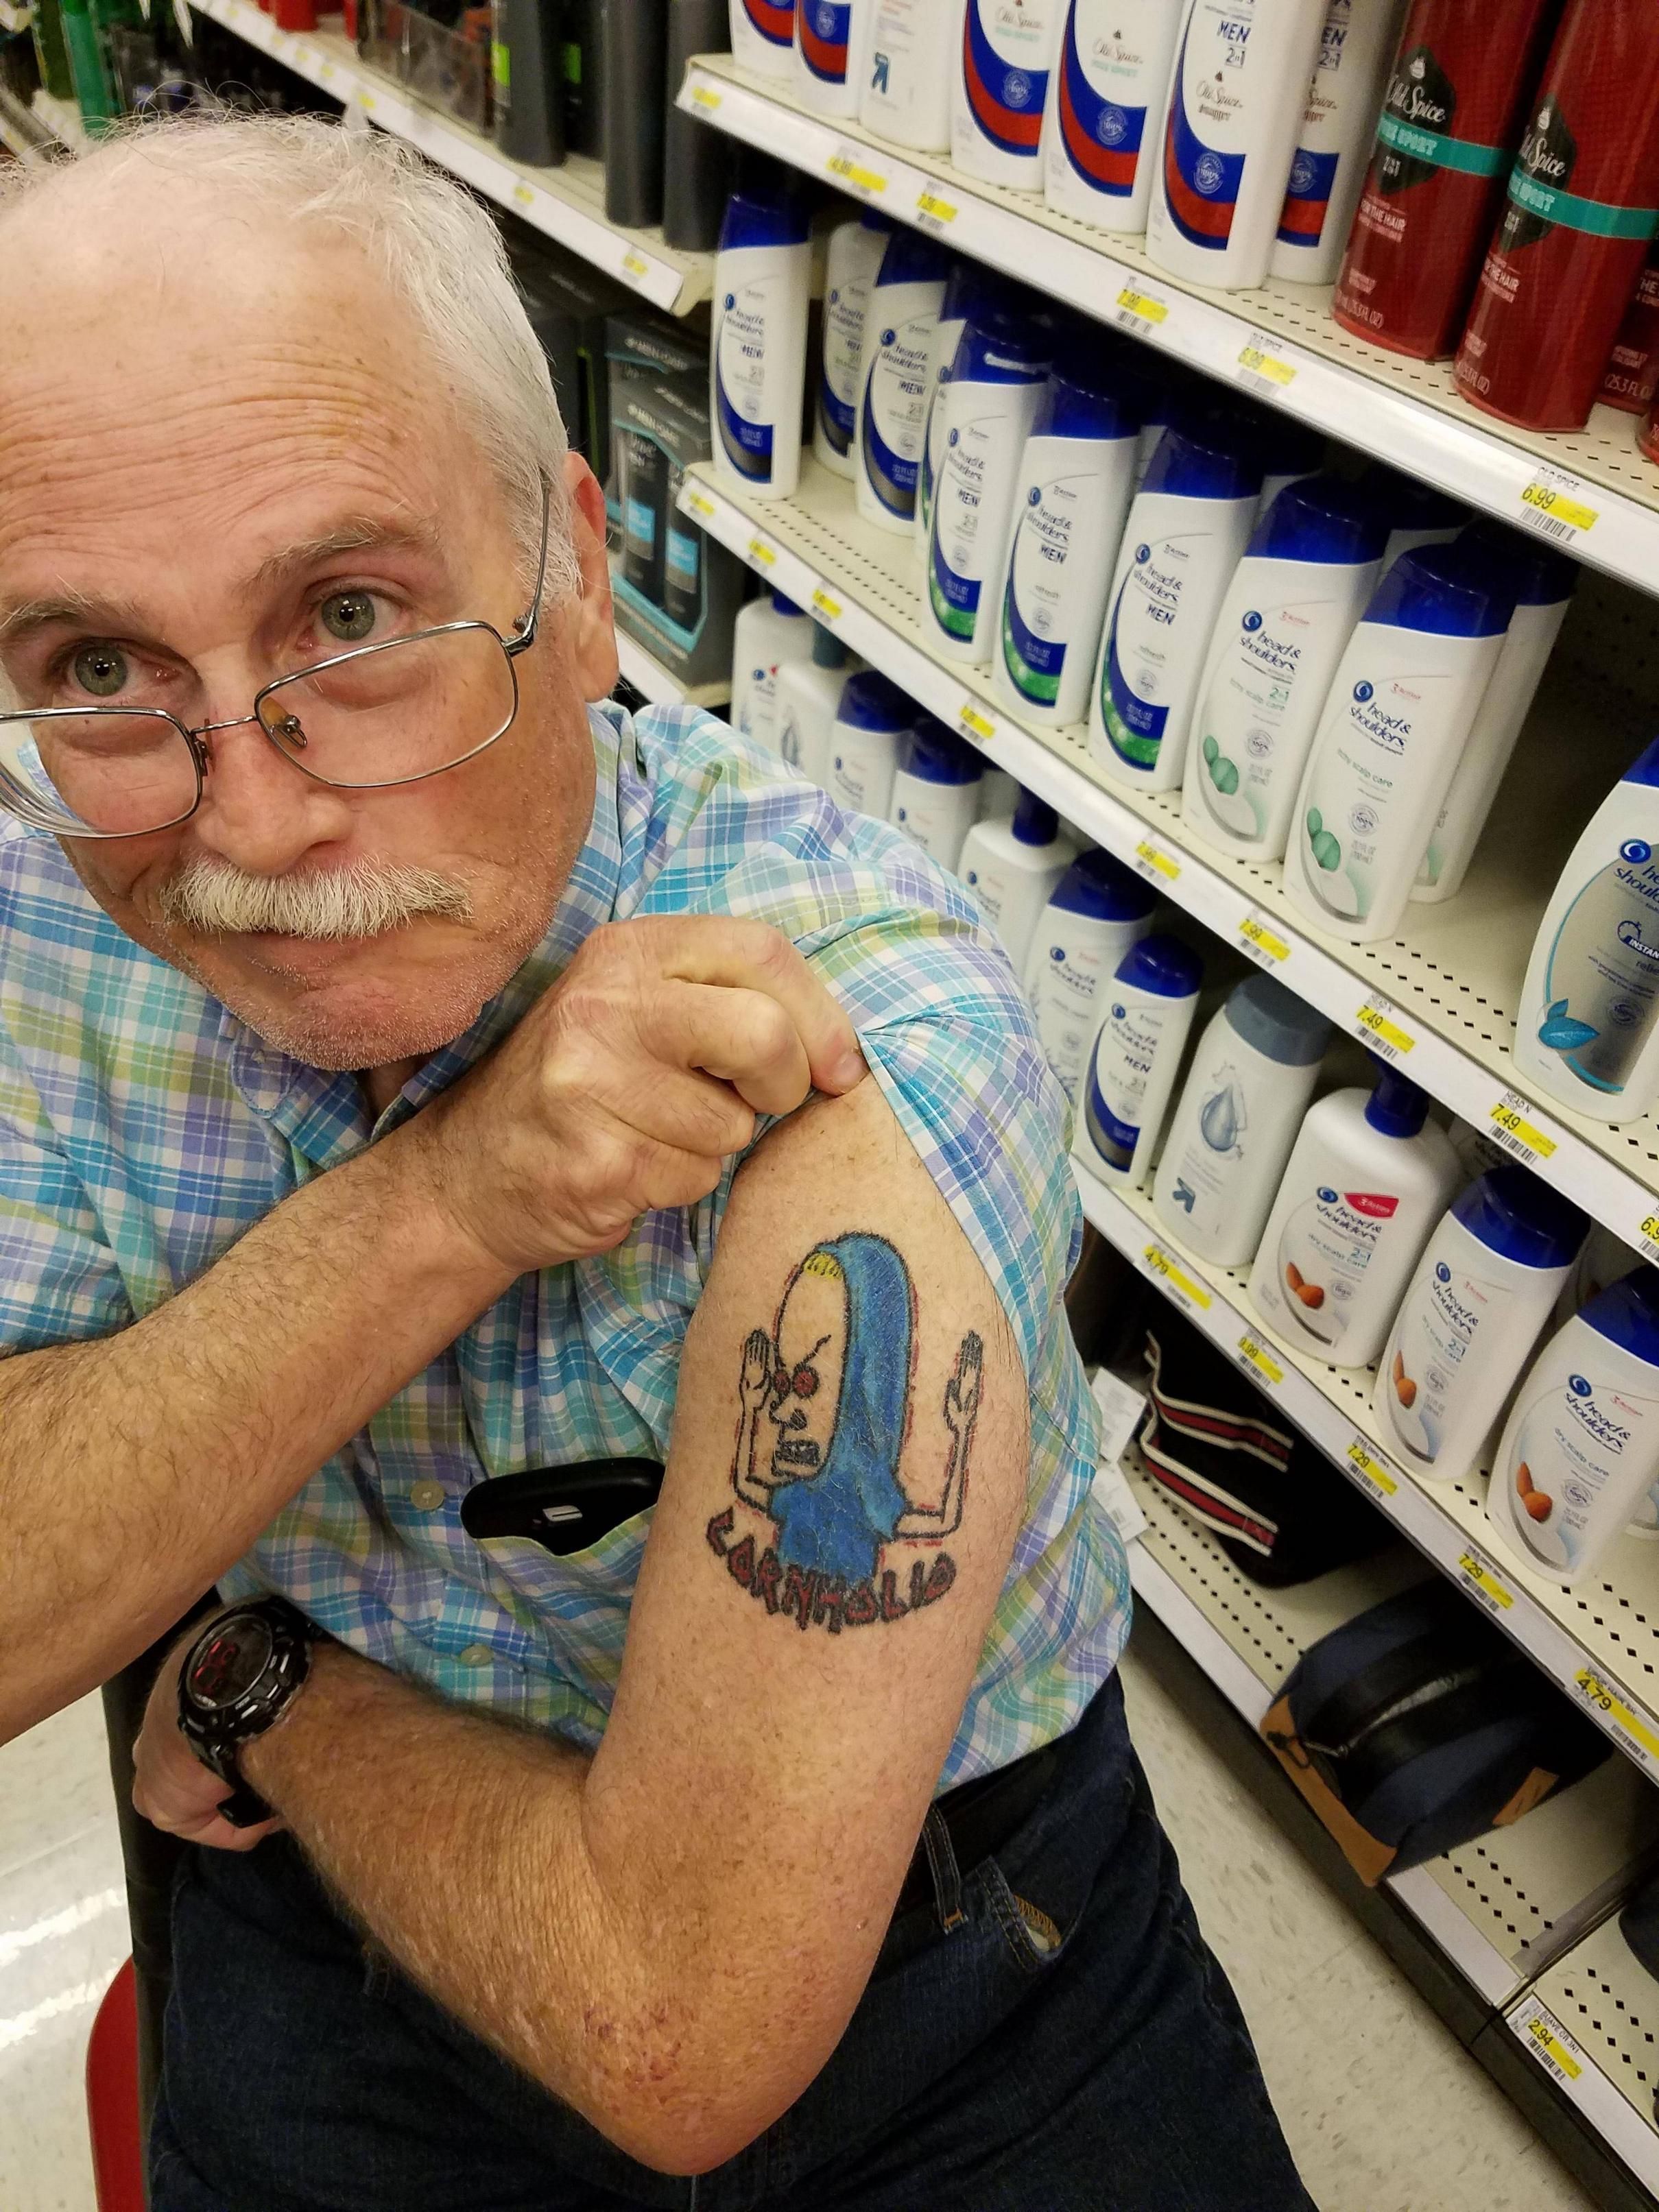 Met this guy at Target today, he is 75.